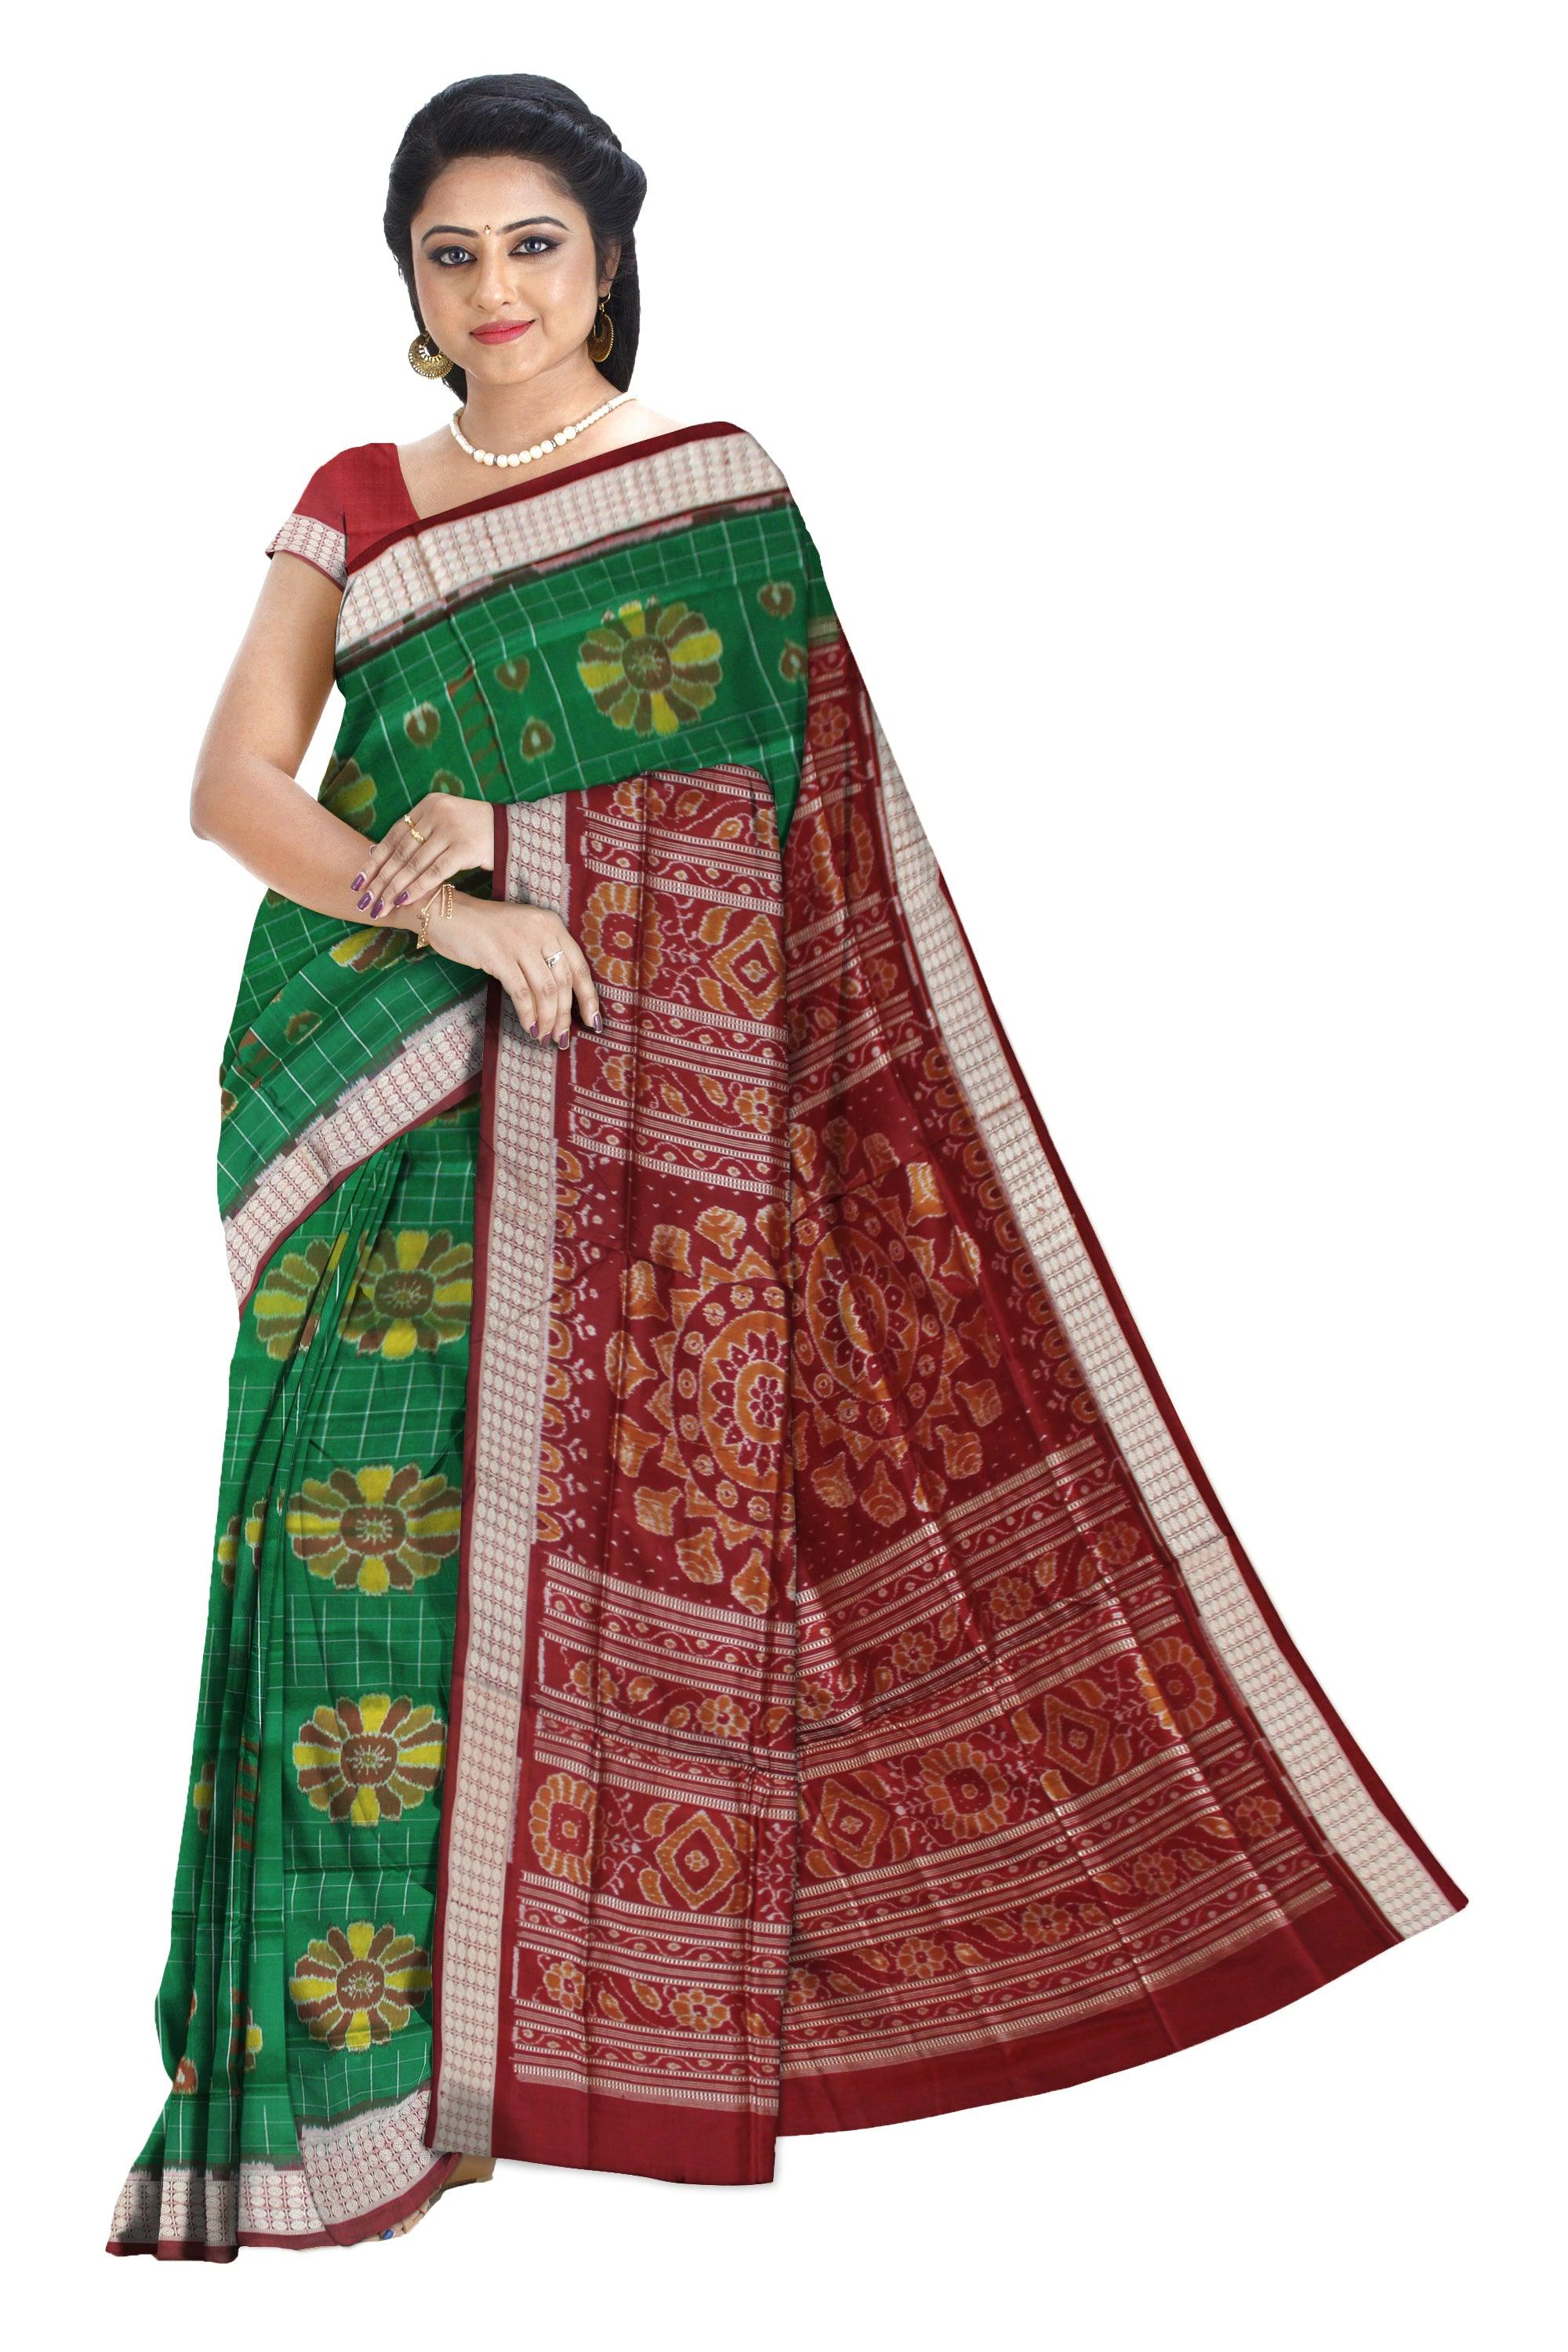 GREEN AND MAROON COLOR BODY BANDHA PATTERN PURE SILK SAREE, AVAILABLE WITH BLOUSE PIECE. - Koshali Arts & Crafts Enterprise